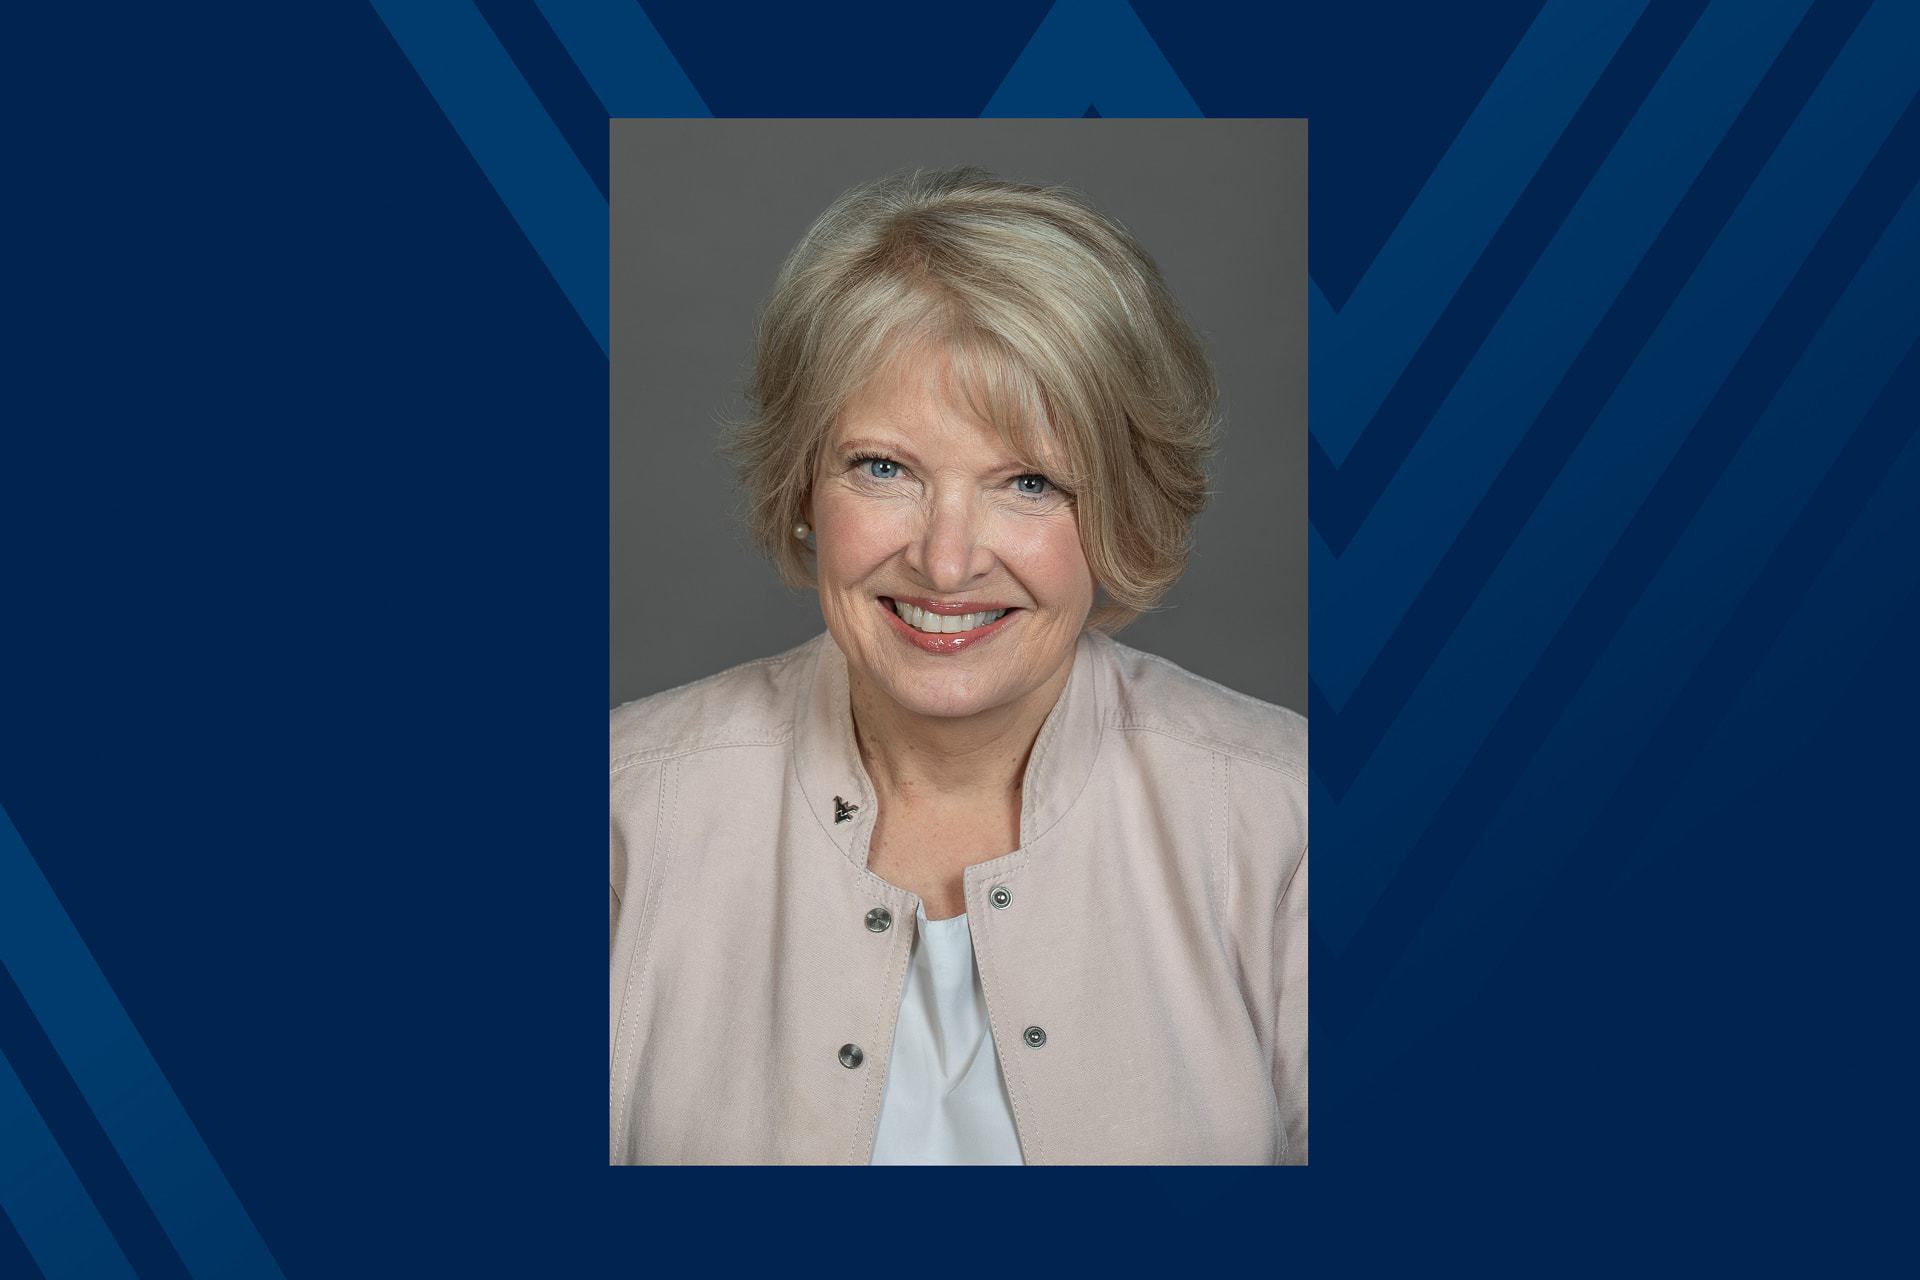 Sue Day-Perroots has been named interim dean of WVU Extension for one year pending a national search for the position.